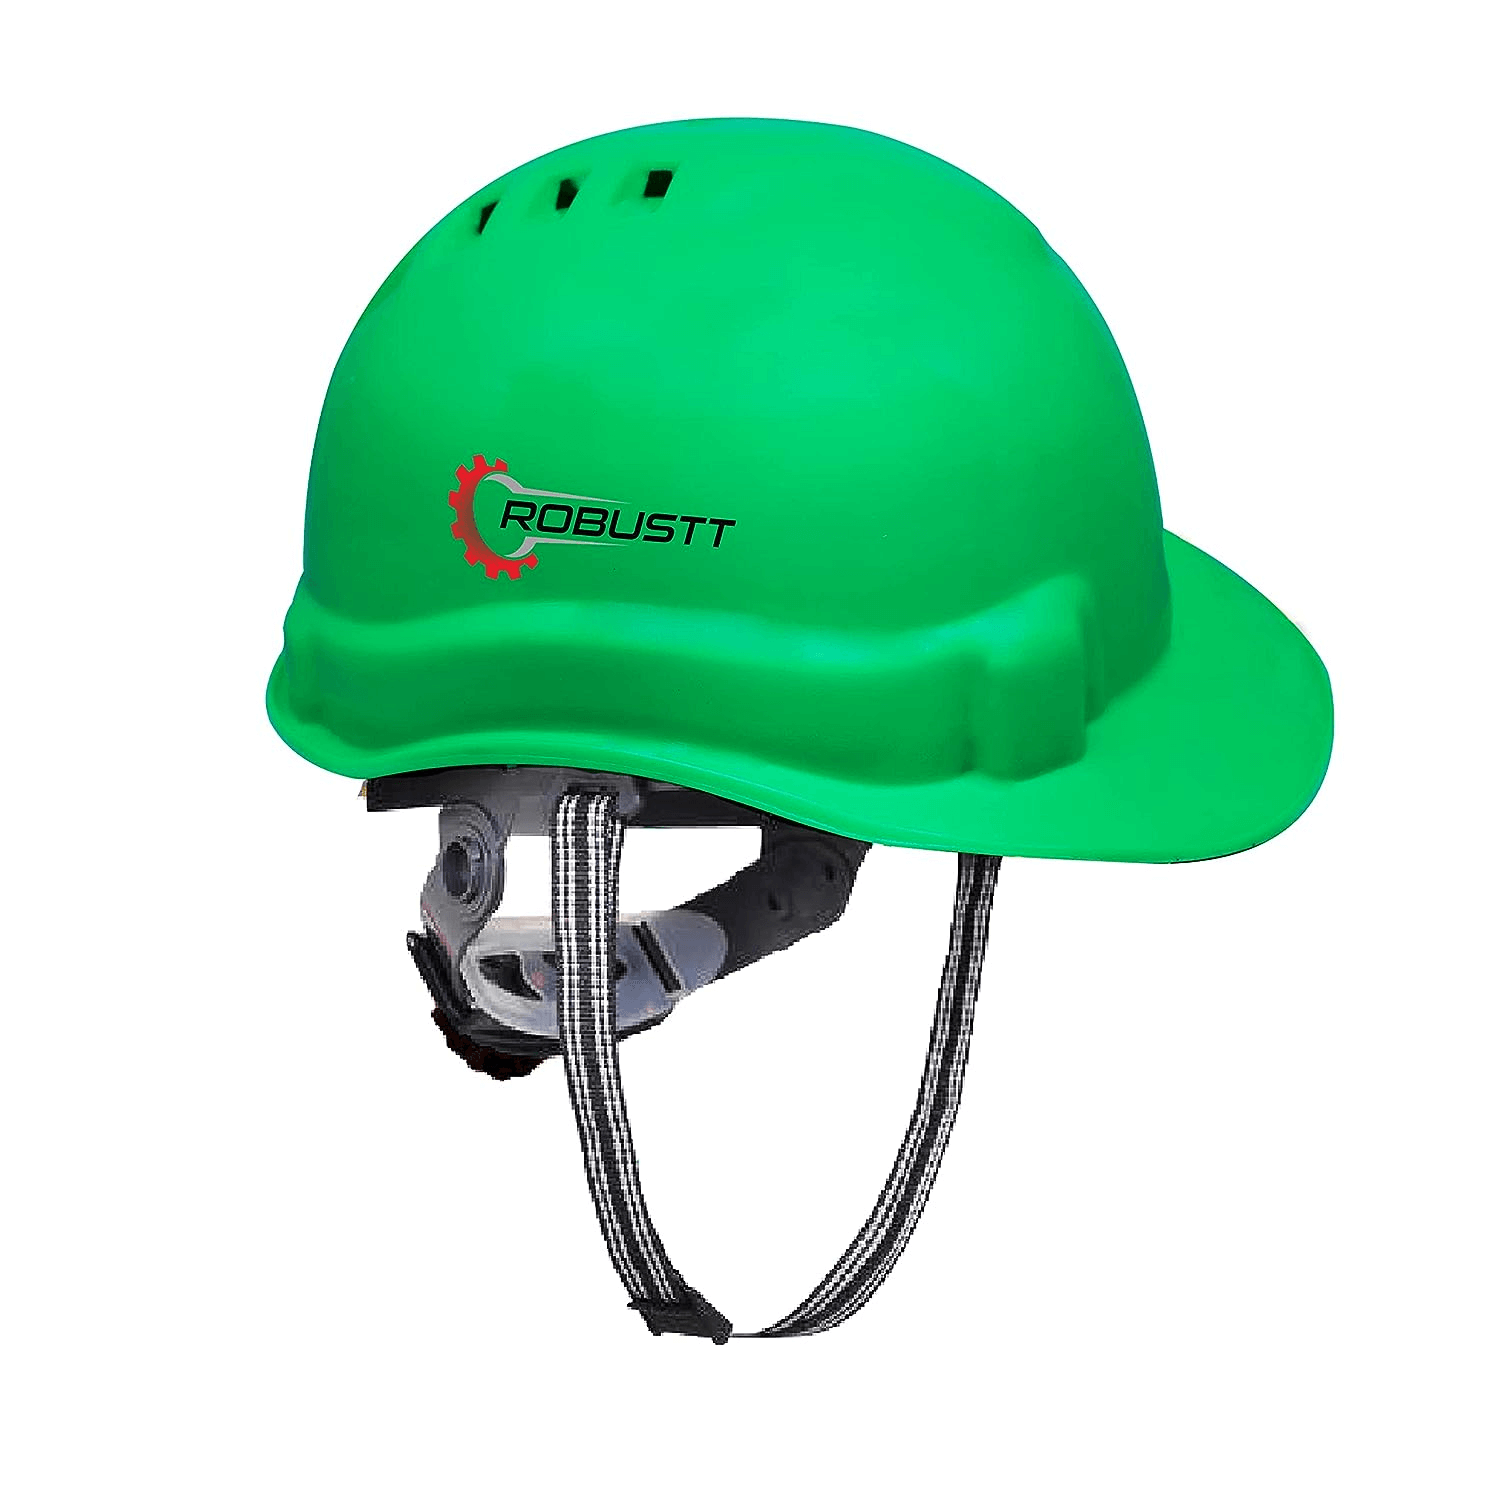 robustt-x-shree-jee-safety-helmet-executive-ratchet-type-adjustment-protection-for-outdoor-work-head-safety-hat-with-sweat-band-green-pack-of-1